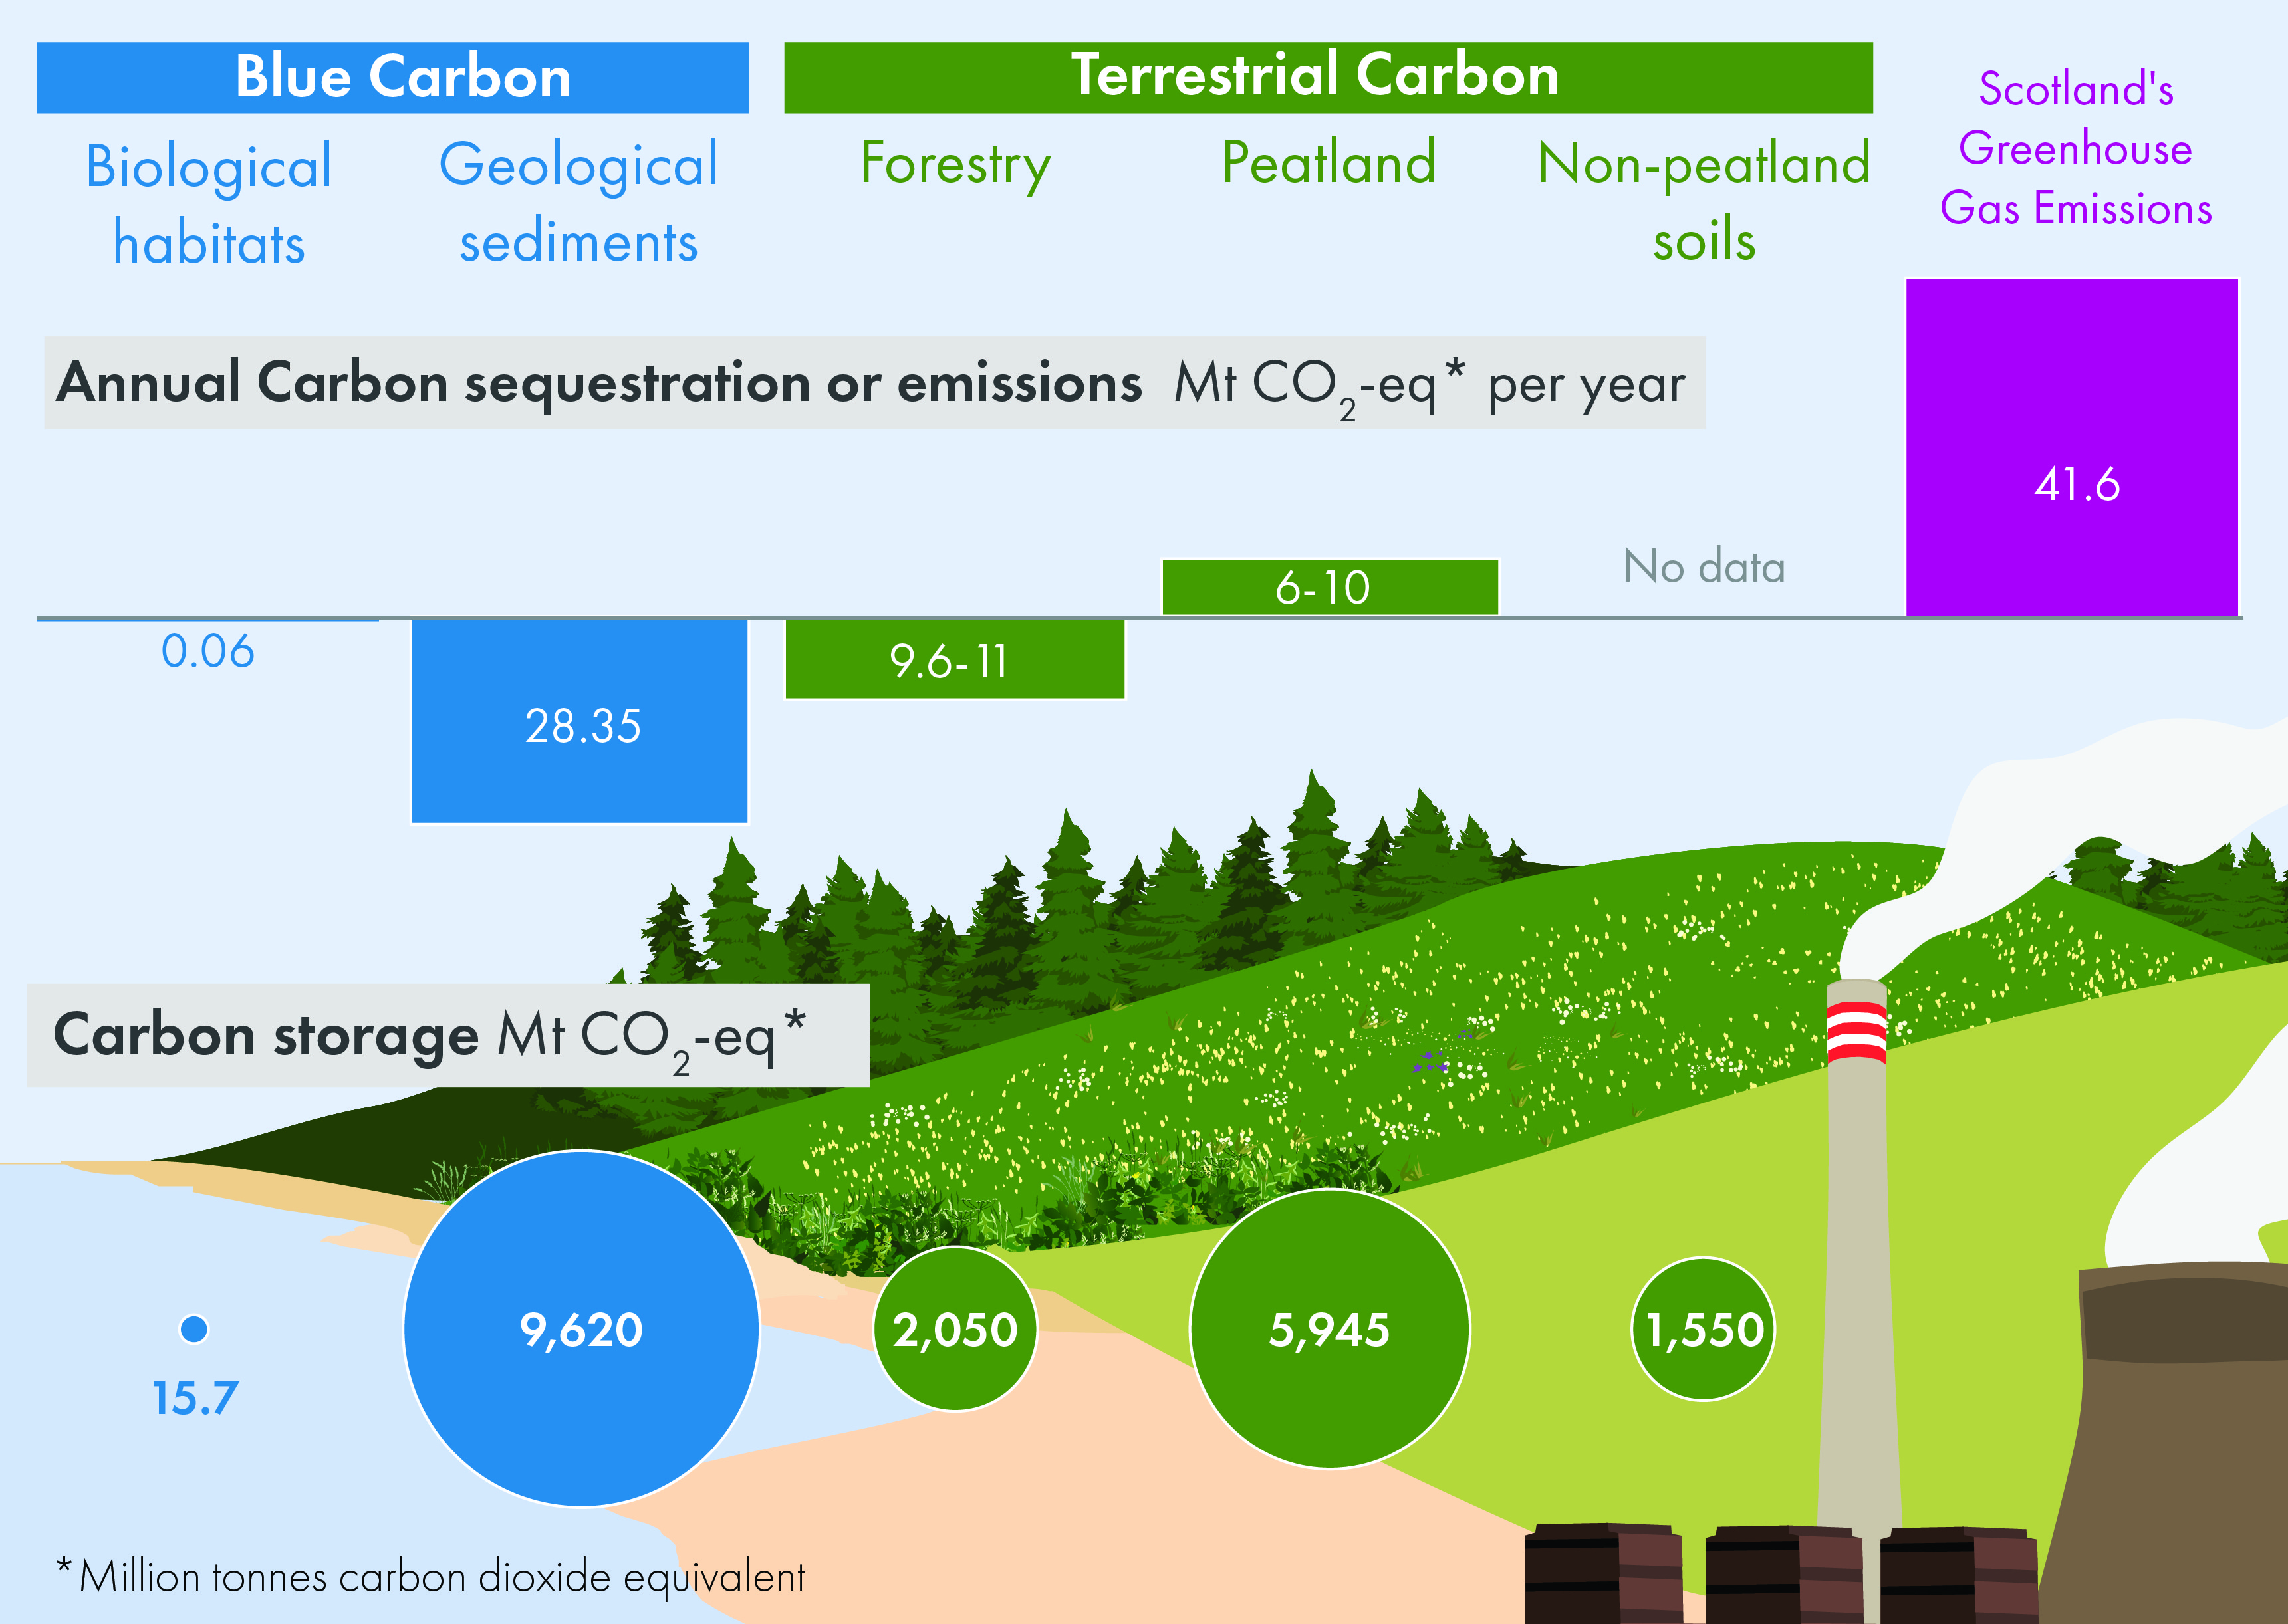 Infographic showing the carbon stored and annually sequestered (in megatonnes of carbon dioxide equivalent per year) in Scotland's blue carbon, split into biological habitats and marine sediments, and Scotland's terrestrial carbon, split into forestry, peatland and non-peatland soils. This is shown alongside Scotland's annual greenhouse gas emissions.